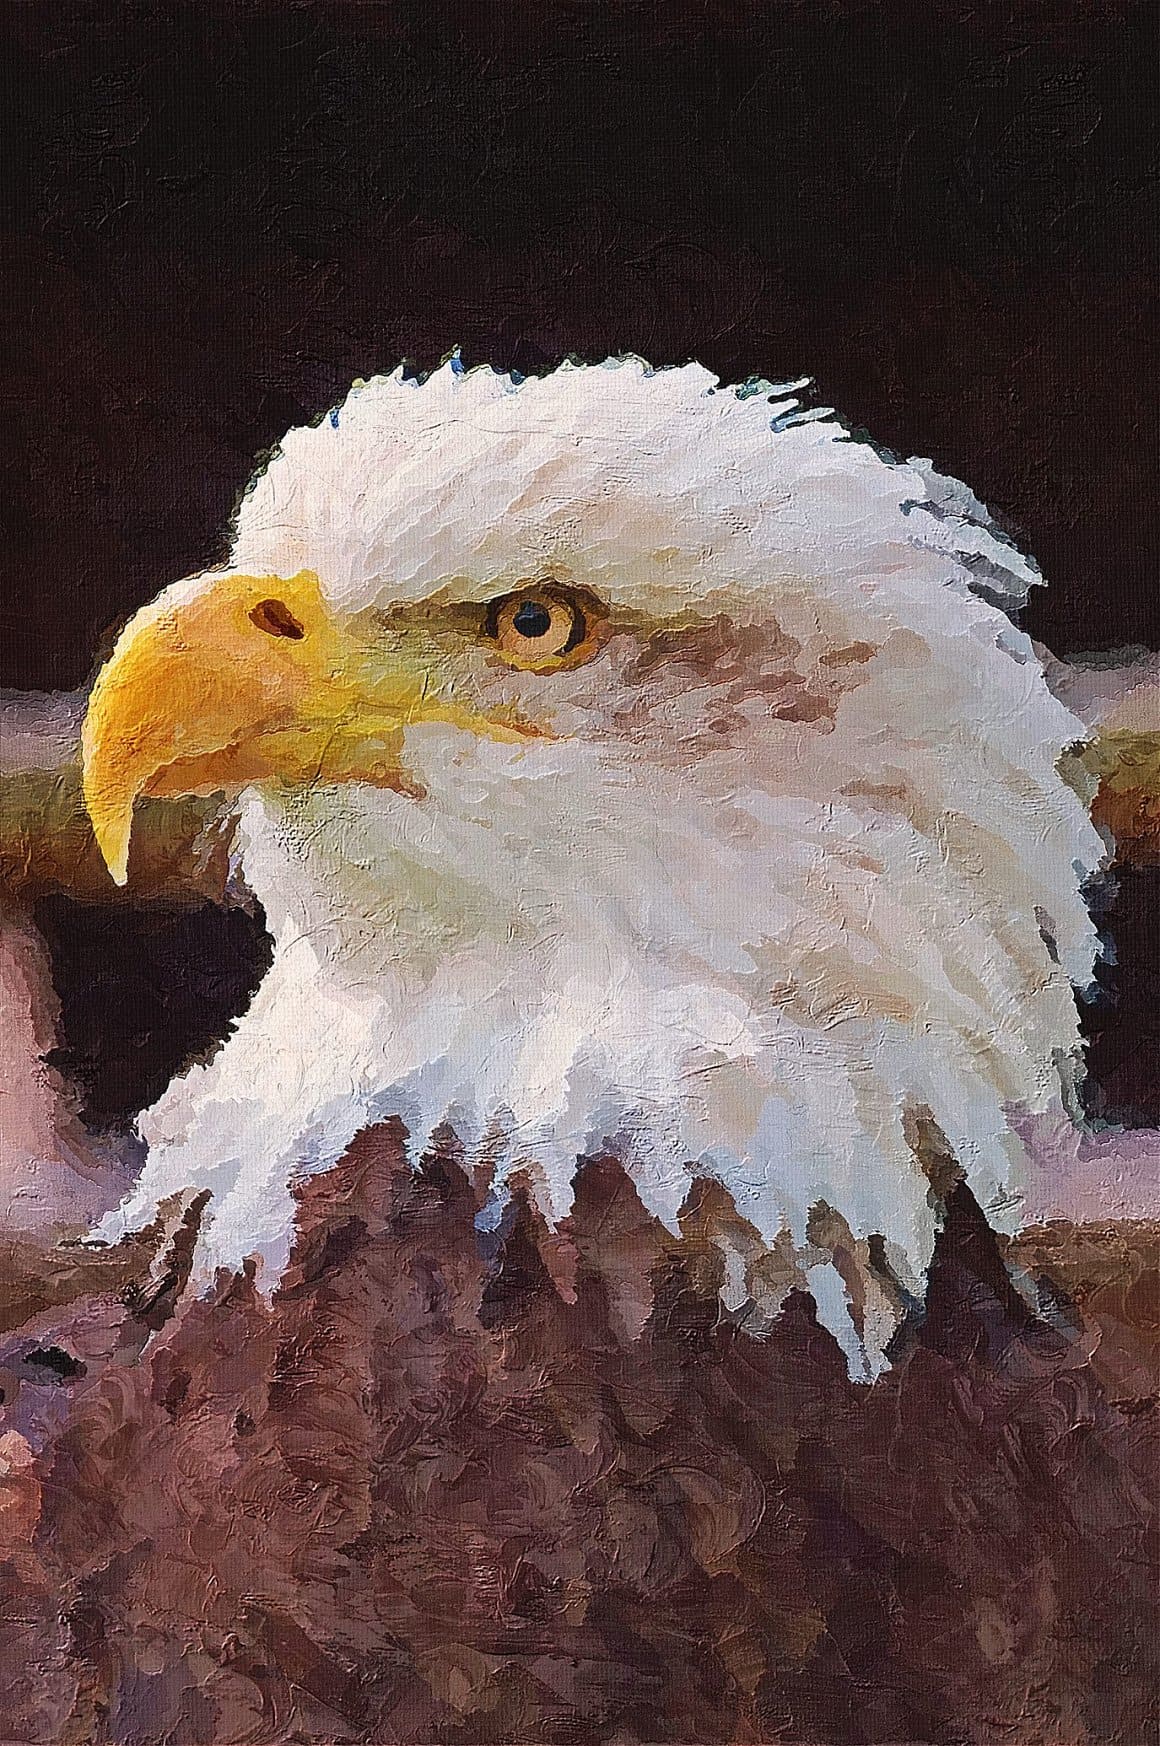 The eagle photo was reworked in Palette Knife Photoshop Action.